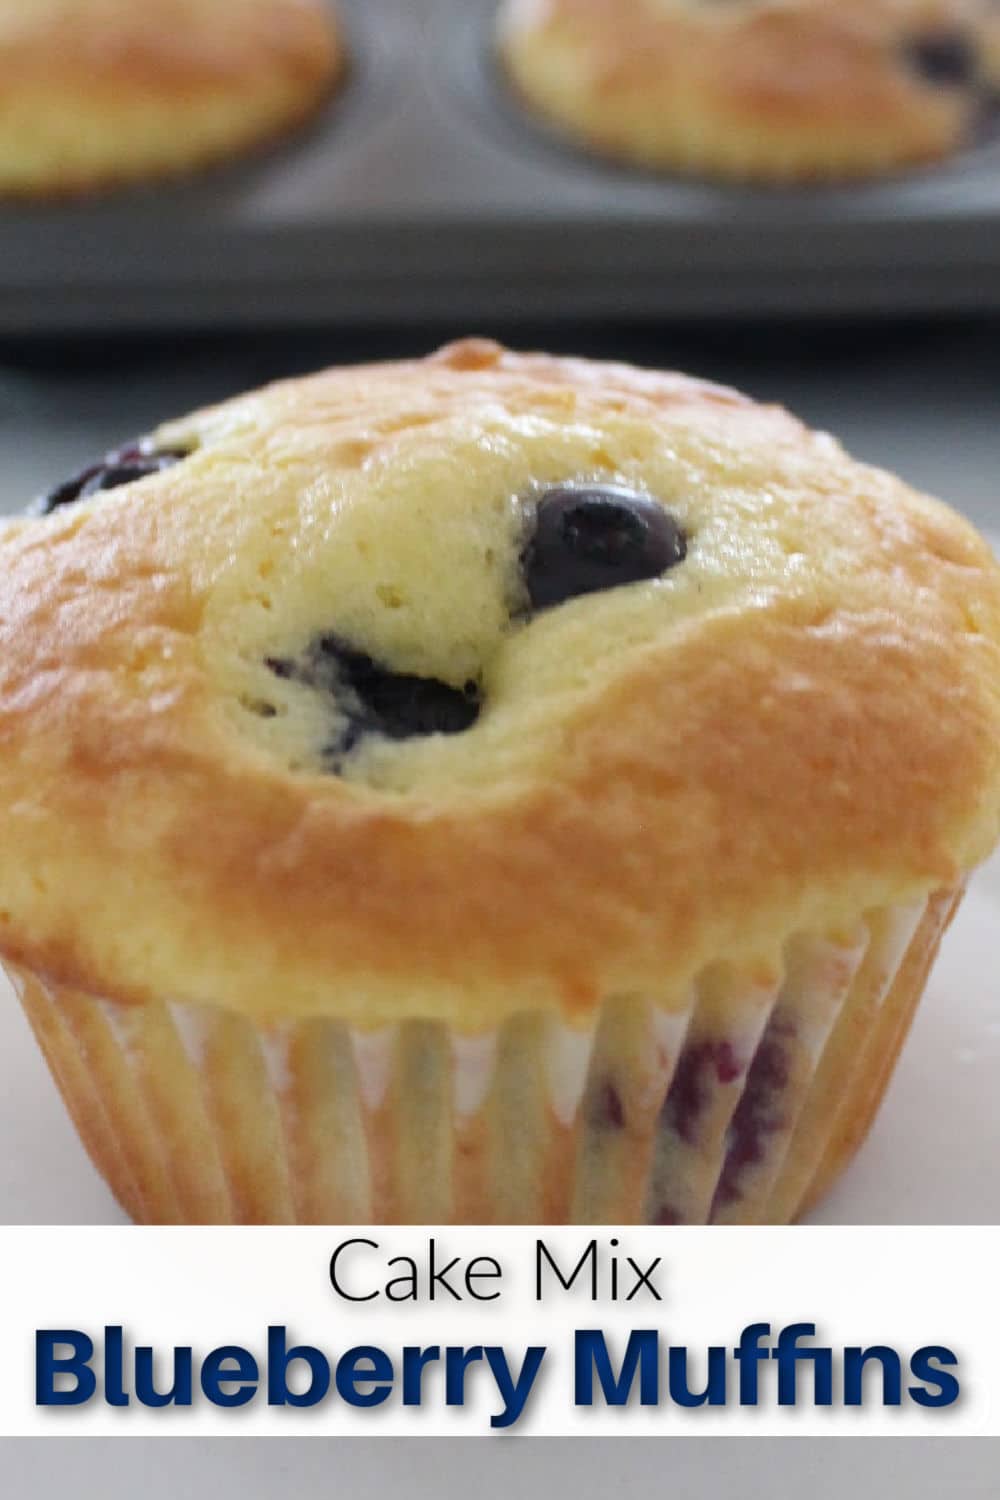 blueberry muffin close up.